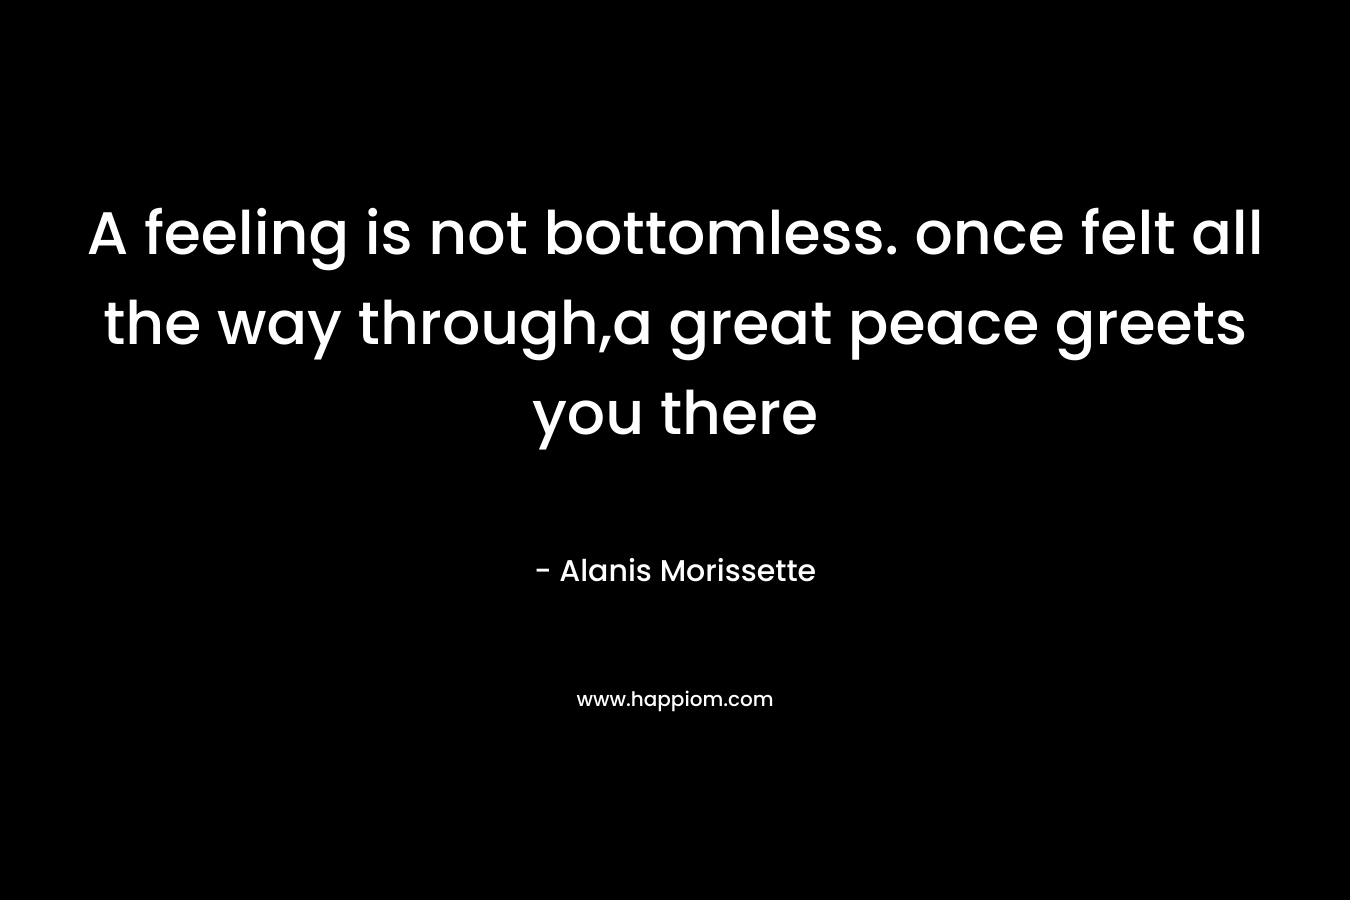 A feeling is not bottomless. once felt all the way through,a great peace greets you there – Alanis Morissette